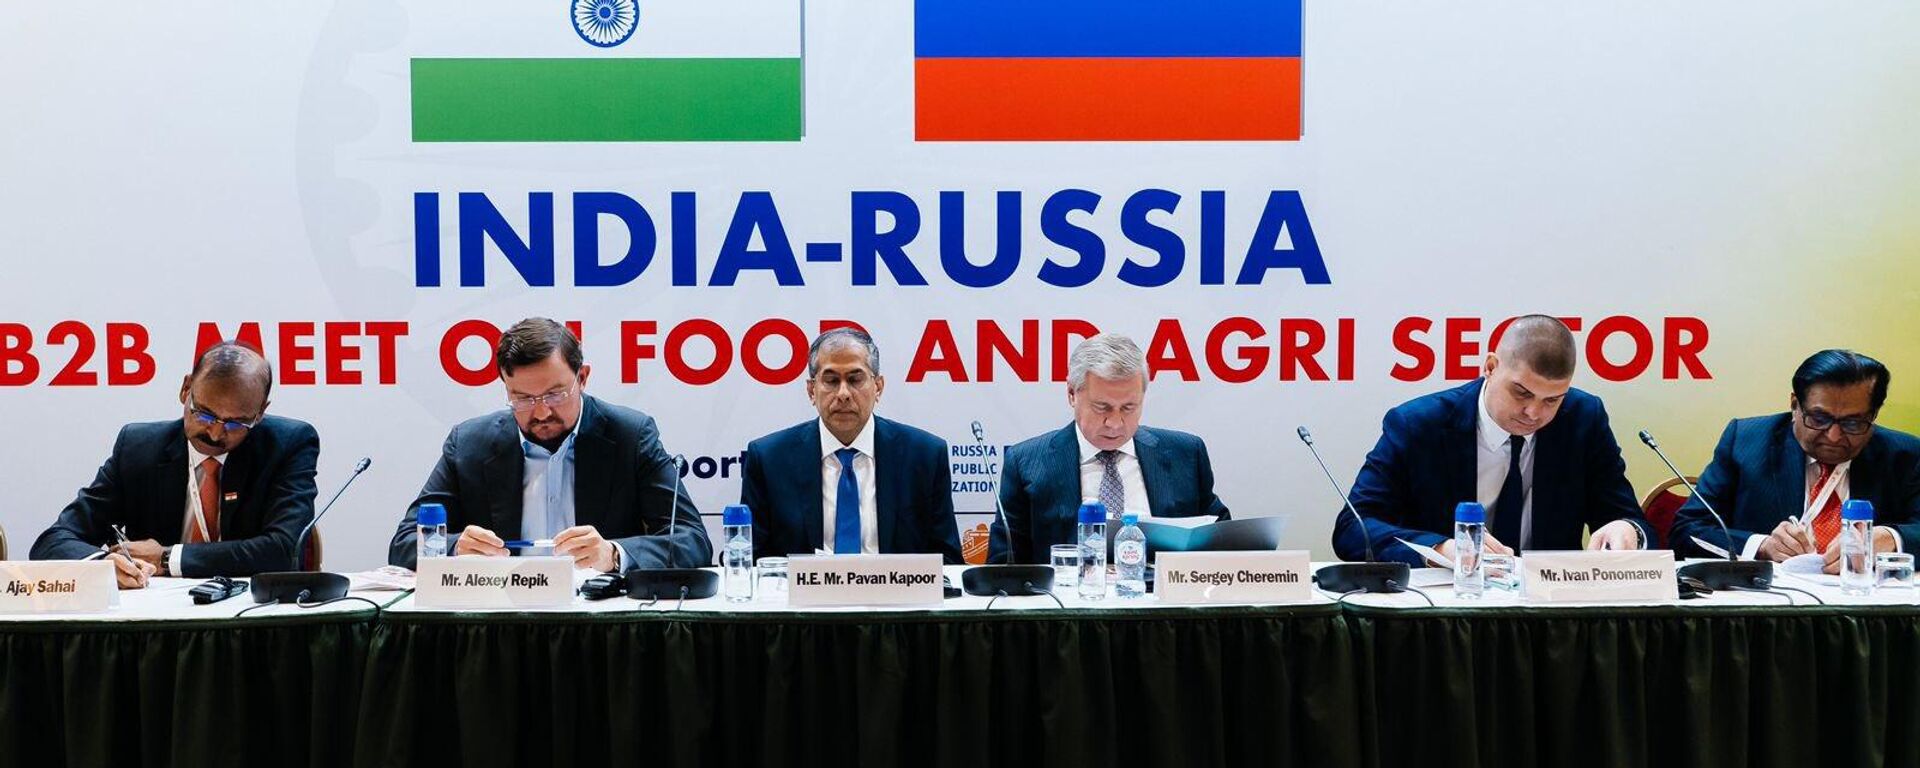 The India-Russia business meeting on Food & Agri sector in Moscow on 24 April 2023 - Sputnik भारत, 1920, 22.11.2023